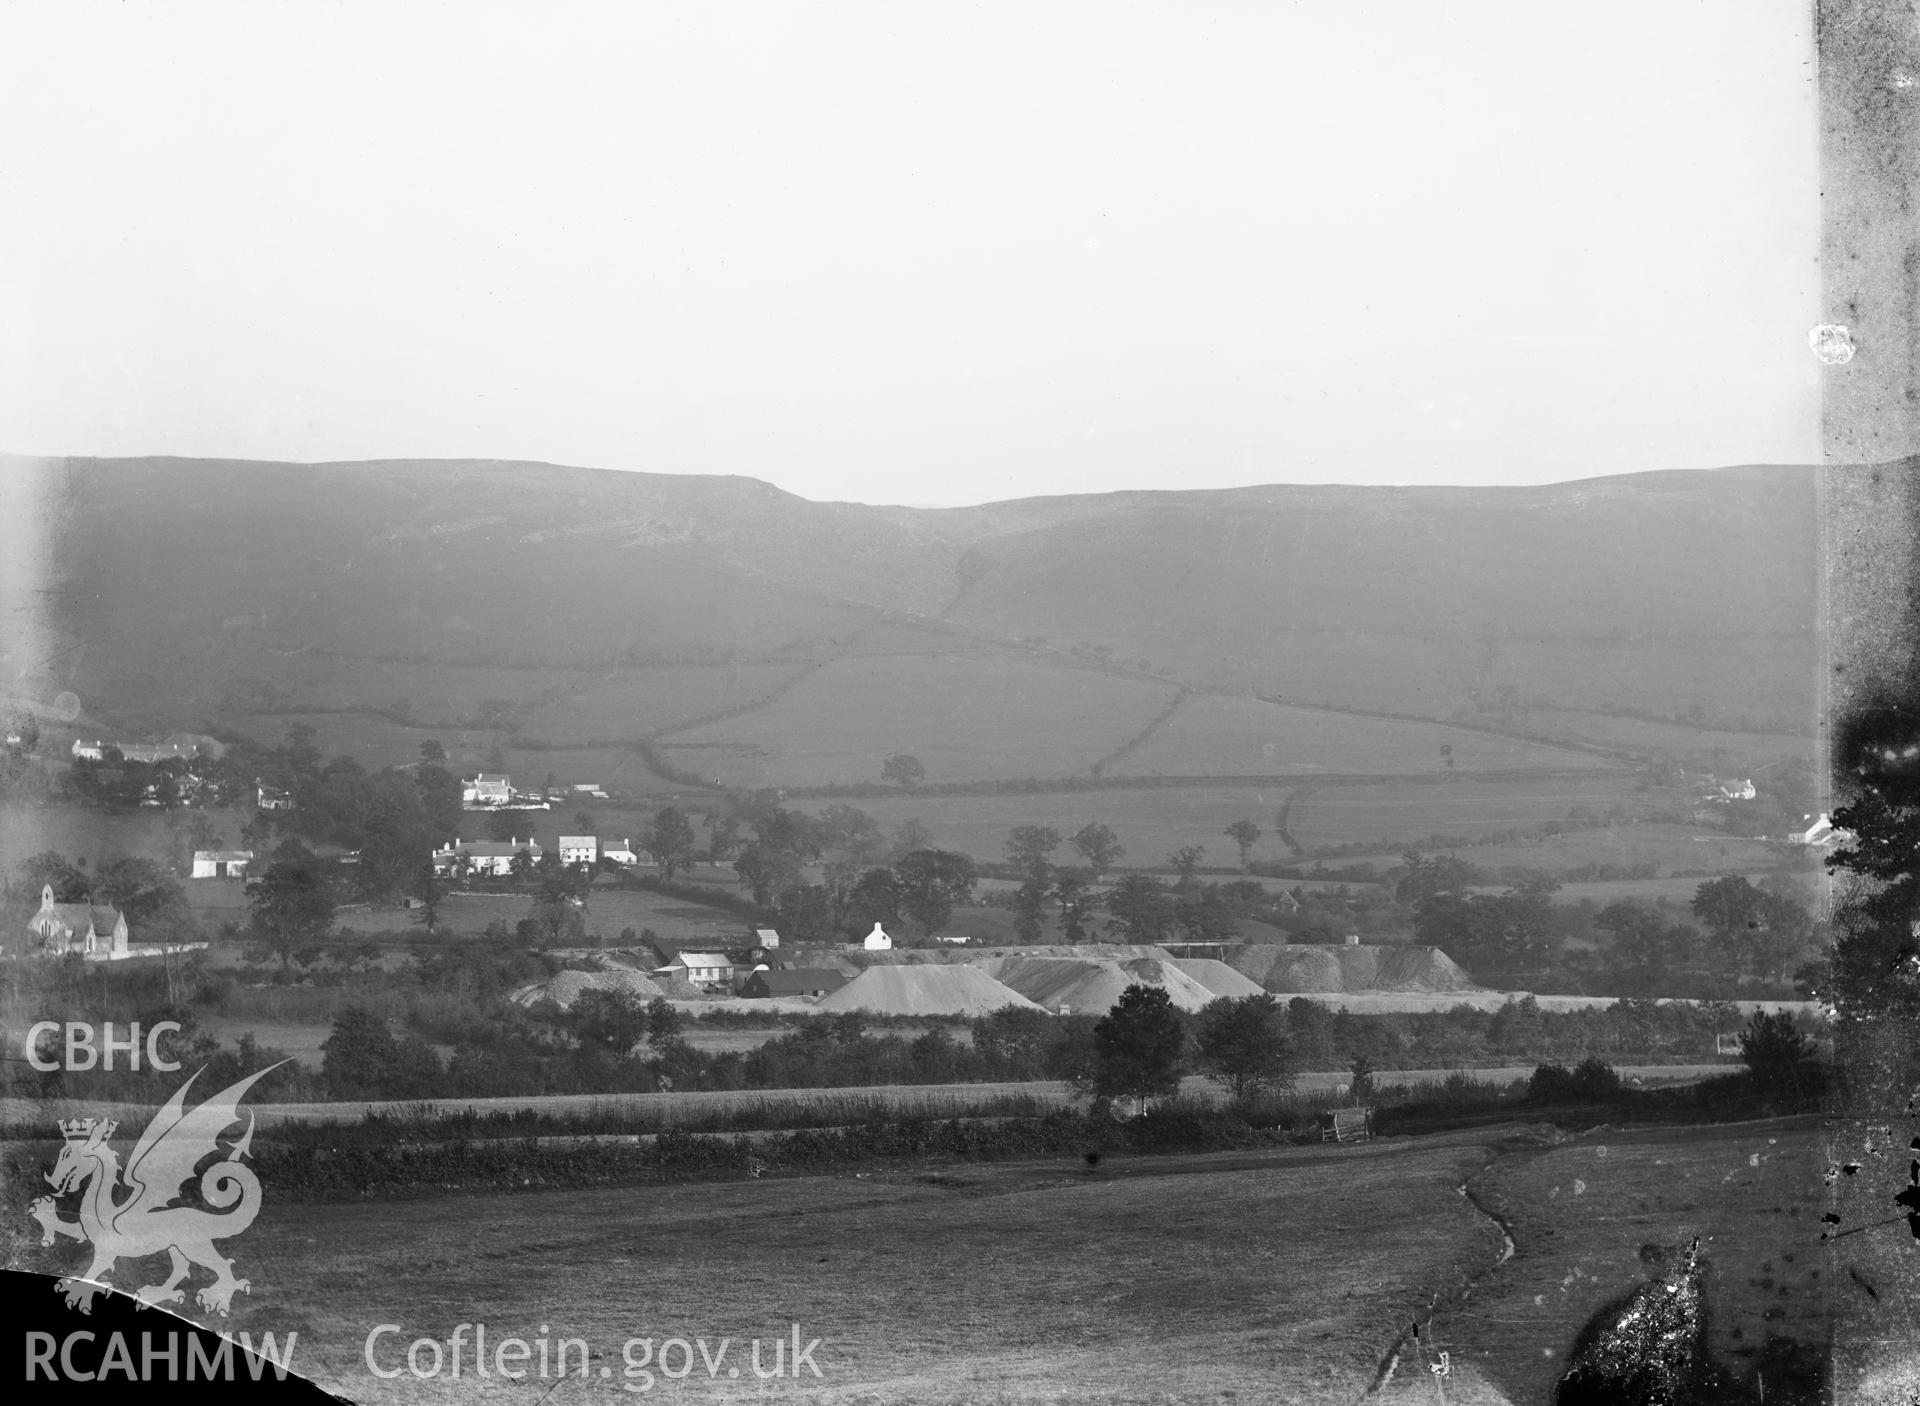 Black and white image dating from c.1910 showing a "mining village" probably in Ceredigion.